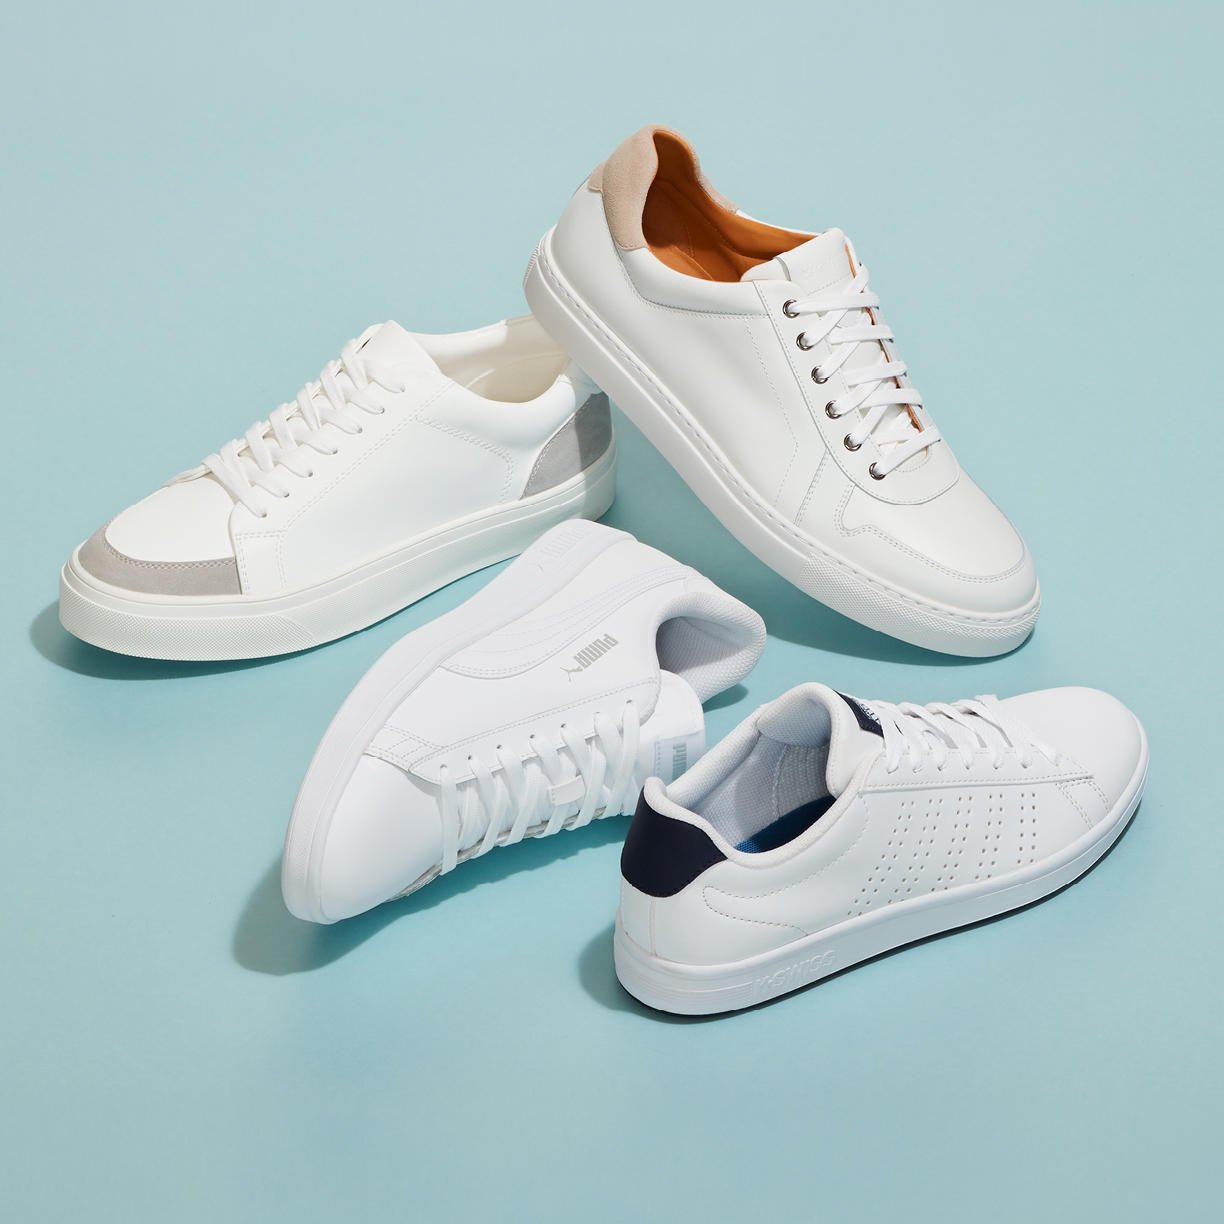 White Sneakers Up to 60% Off